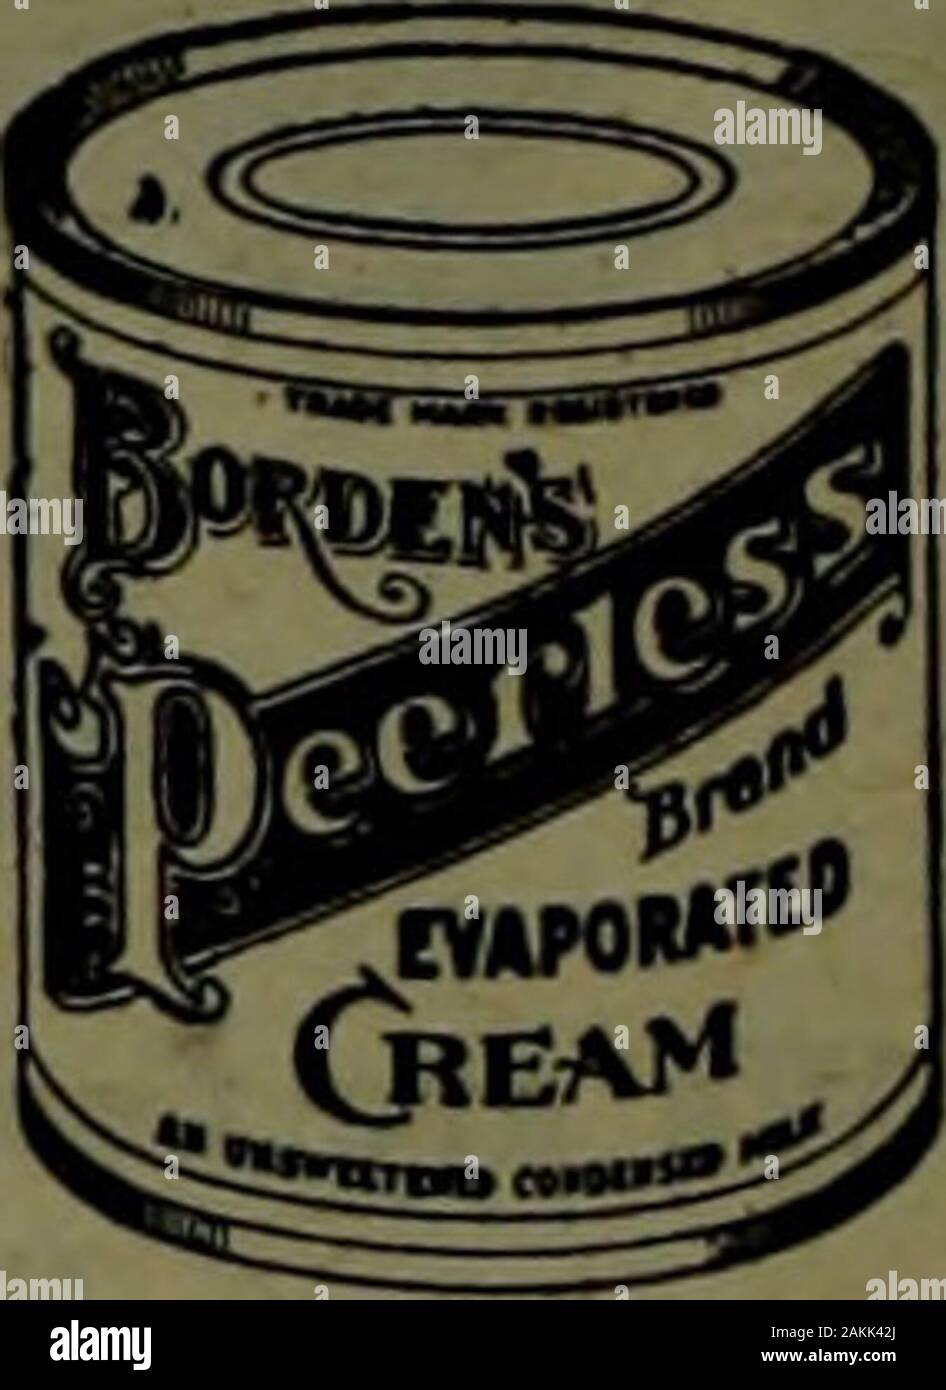 Canadian grocer July-December 1908 . It isnt a difficult matter to get your customers to use Condensed Milk.Suggest a trial of BORDENS BRANDS •EAGLE BRAND • CONDENSED MILR andPEERLESS BRAND EVAPORATED CREAM Now is the time to start in. These lines are most convenient forcamping, fishing, pic-nic and excursion parties. Try it. WILLIAM H. DUNN, Montreal and Toronto Scott, Bathgate & Co., Winnipeg, Man, Shallcross, Macauley &lt;£ Co., Vancouver and Victoria, B.C. ^. Untweetencd RIVERDALE BRAND Is pre-eminently the highest quality in Canned Fruits and Vegetables ^ We cant afford to go back on qual Stock Photo